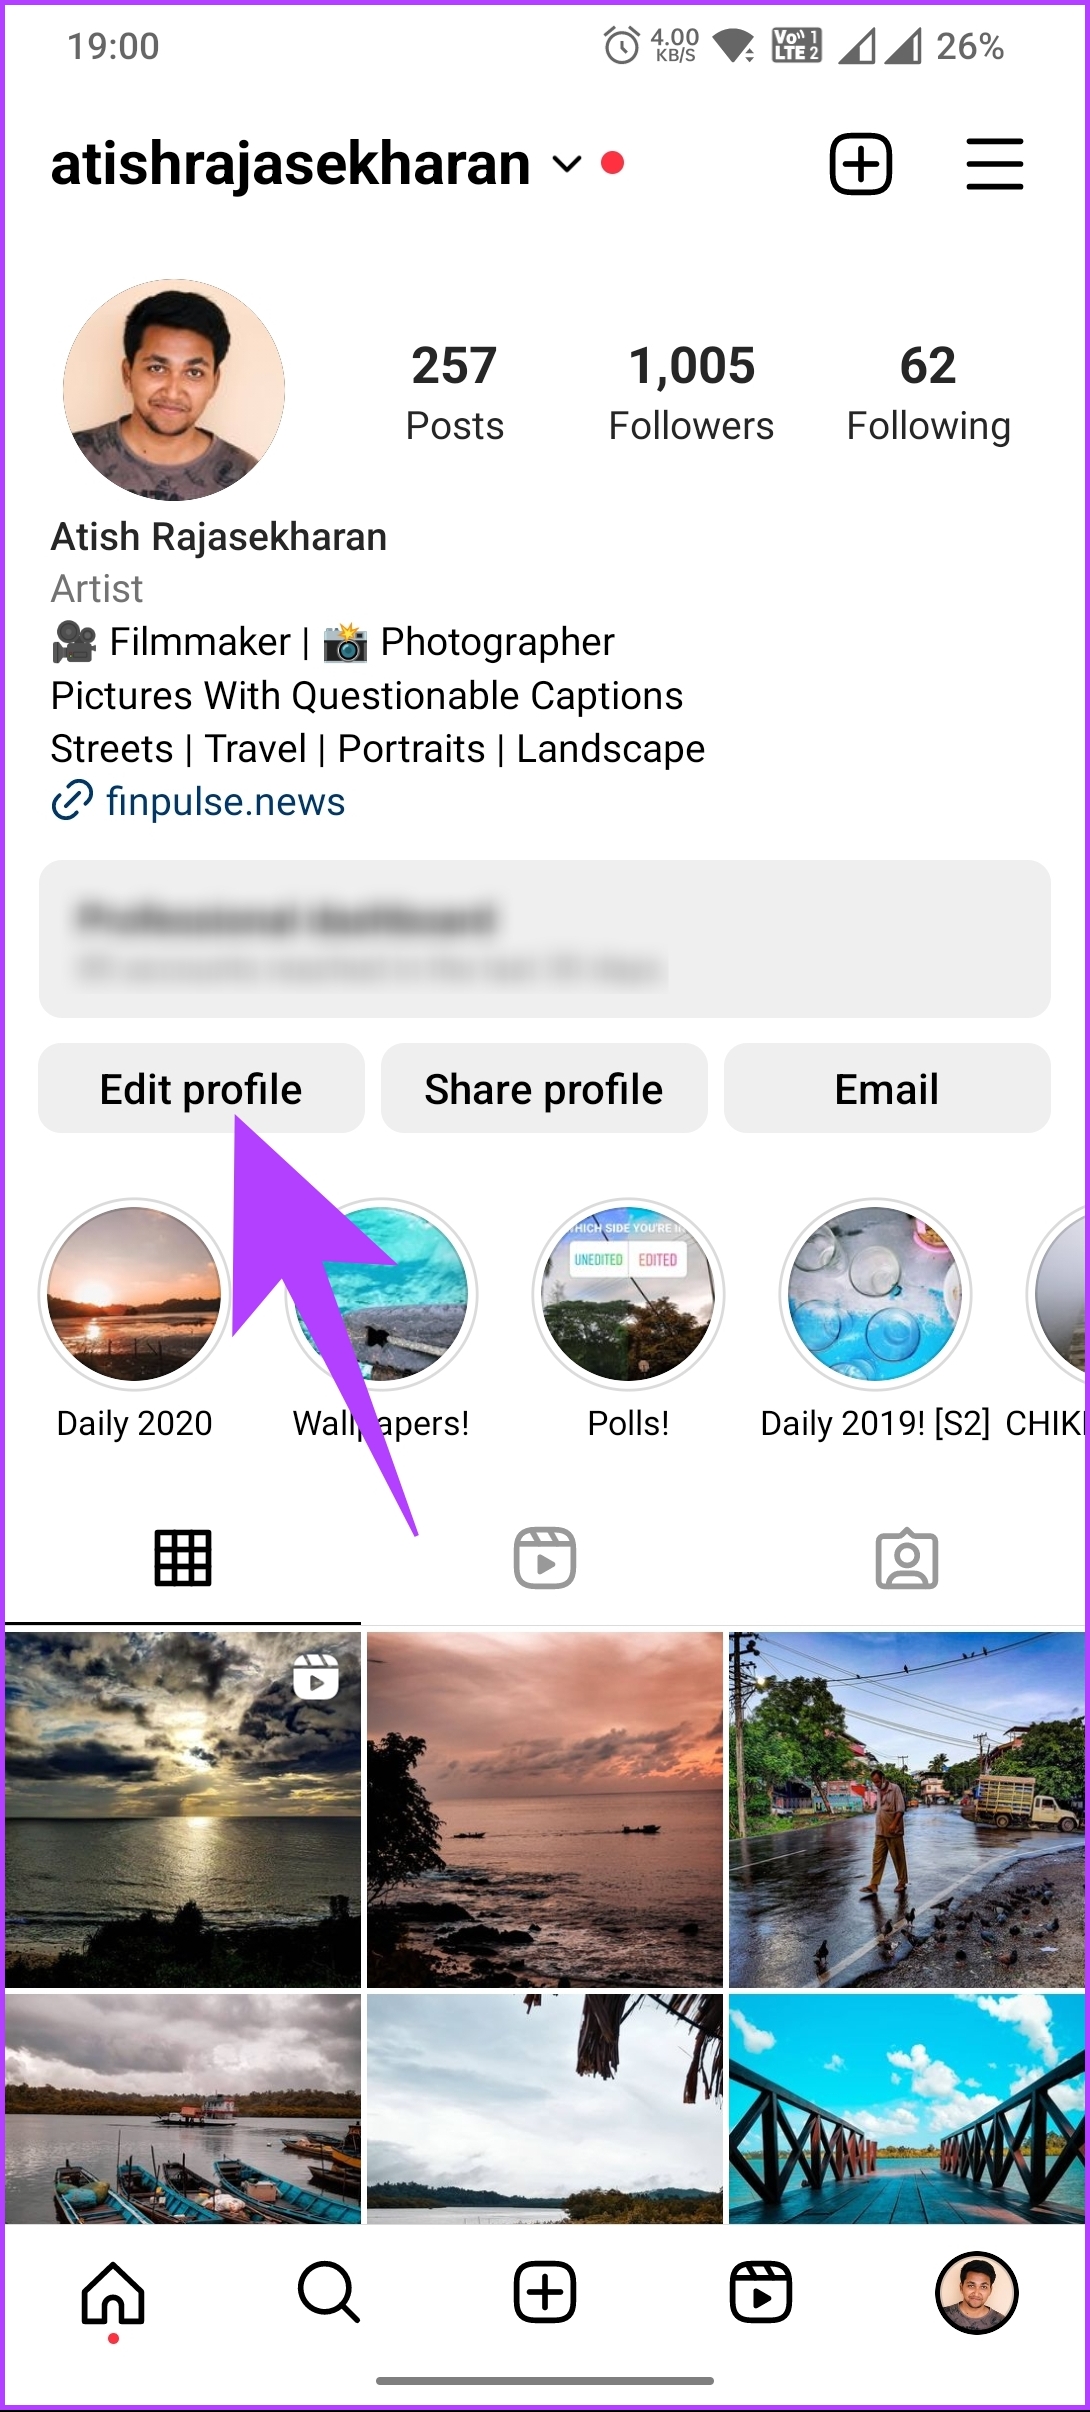 Tap on the Edit profile